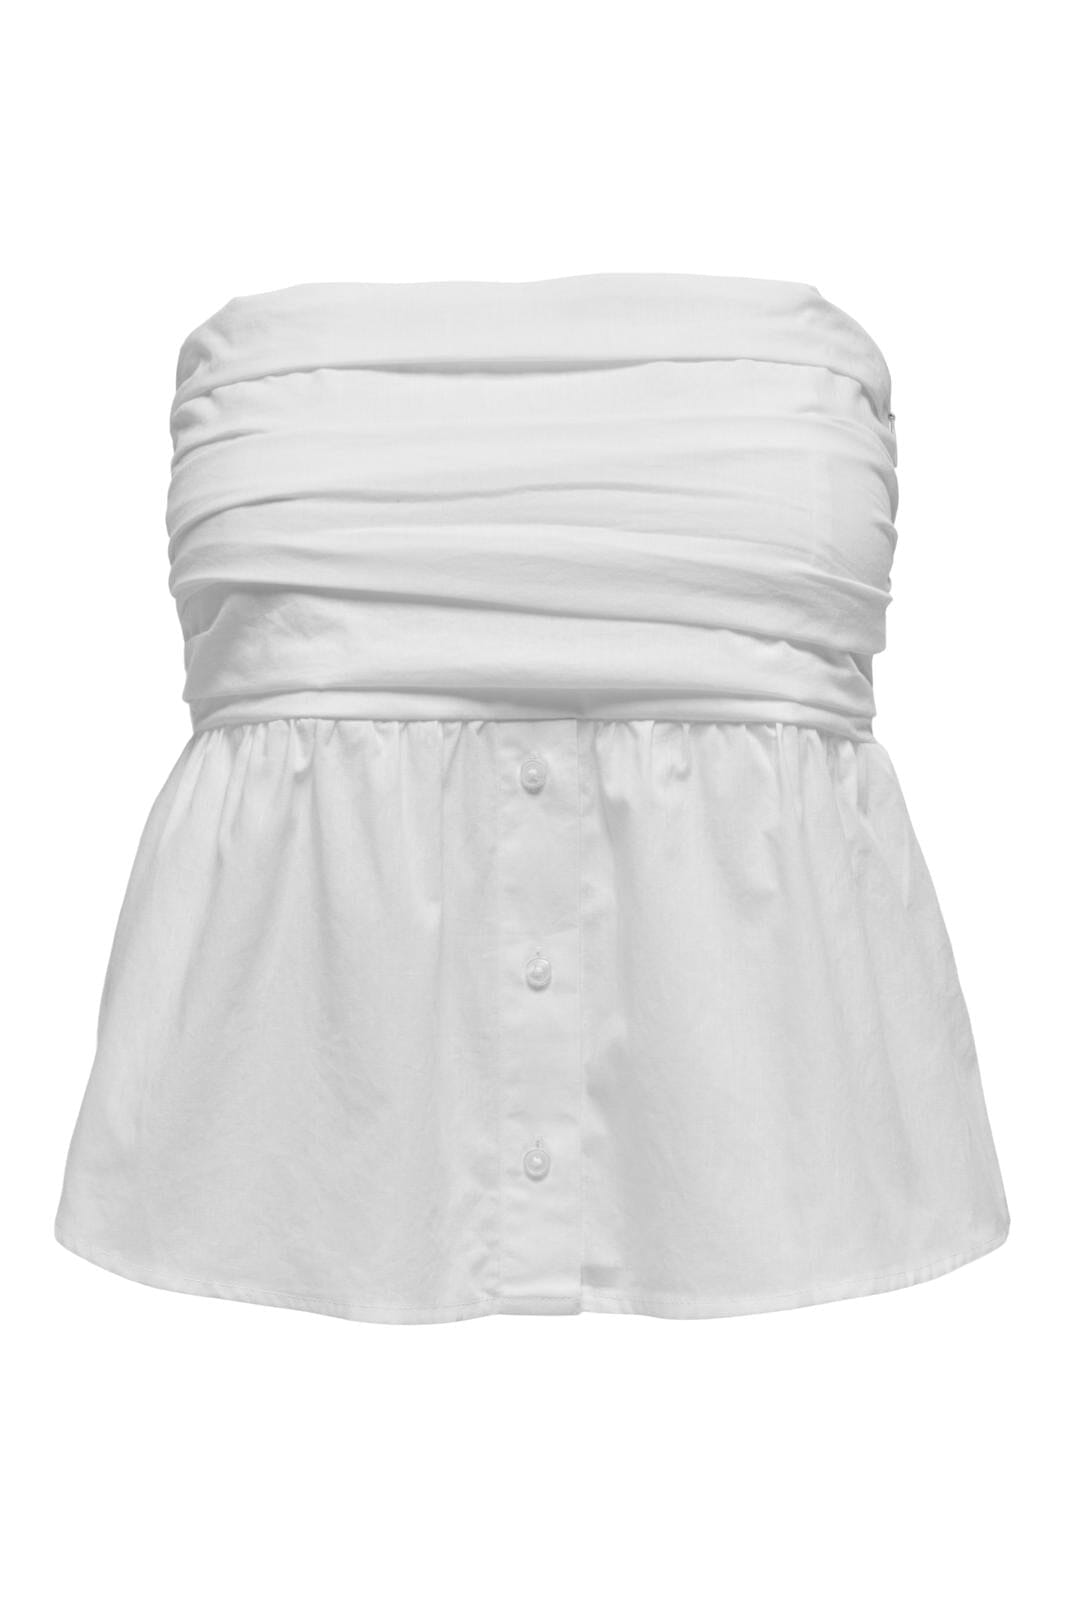 Only - Onlesie Life Bandeau Top - 4465852 White